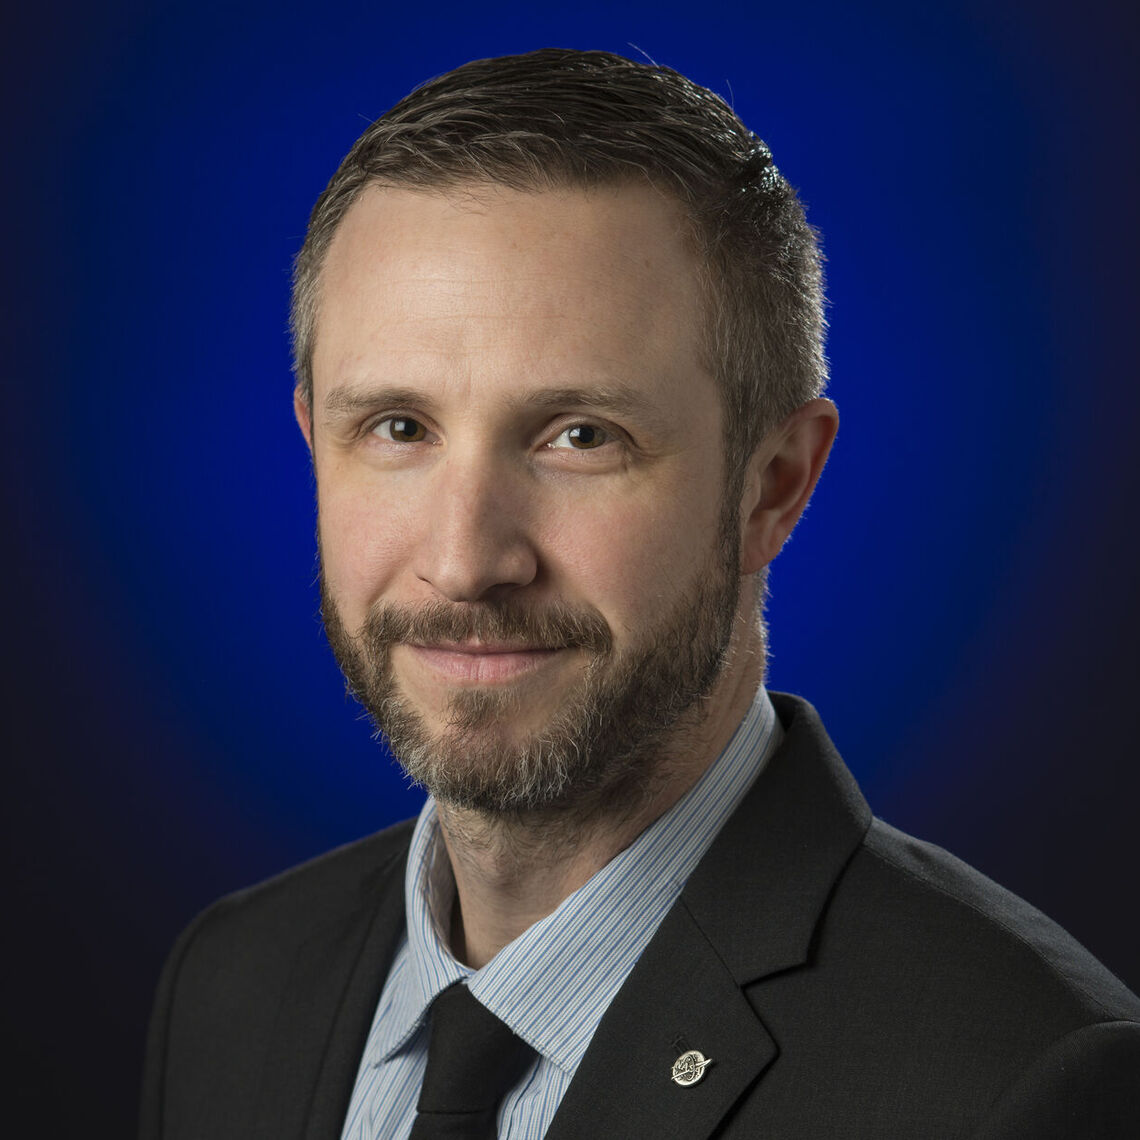 Jacob Bleacher '00 will be the featured speaker at Franklin & Marshall's 236th Commencement May 13. Bleacher is the chief exploration scientist in NASA's Exploration Systems Development Mission Directorate.